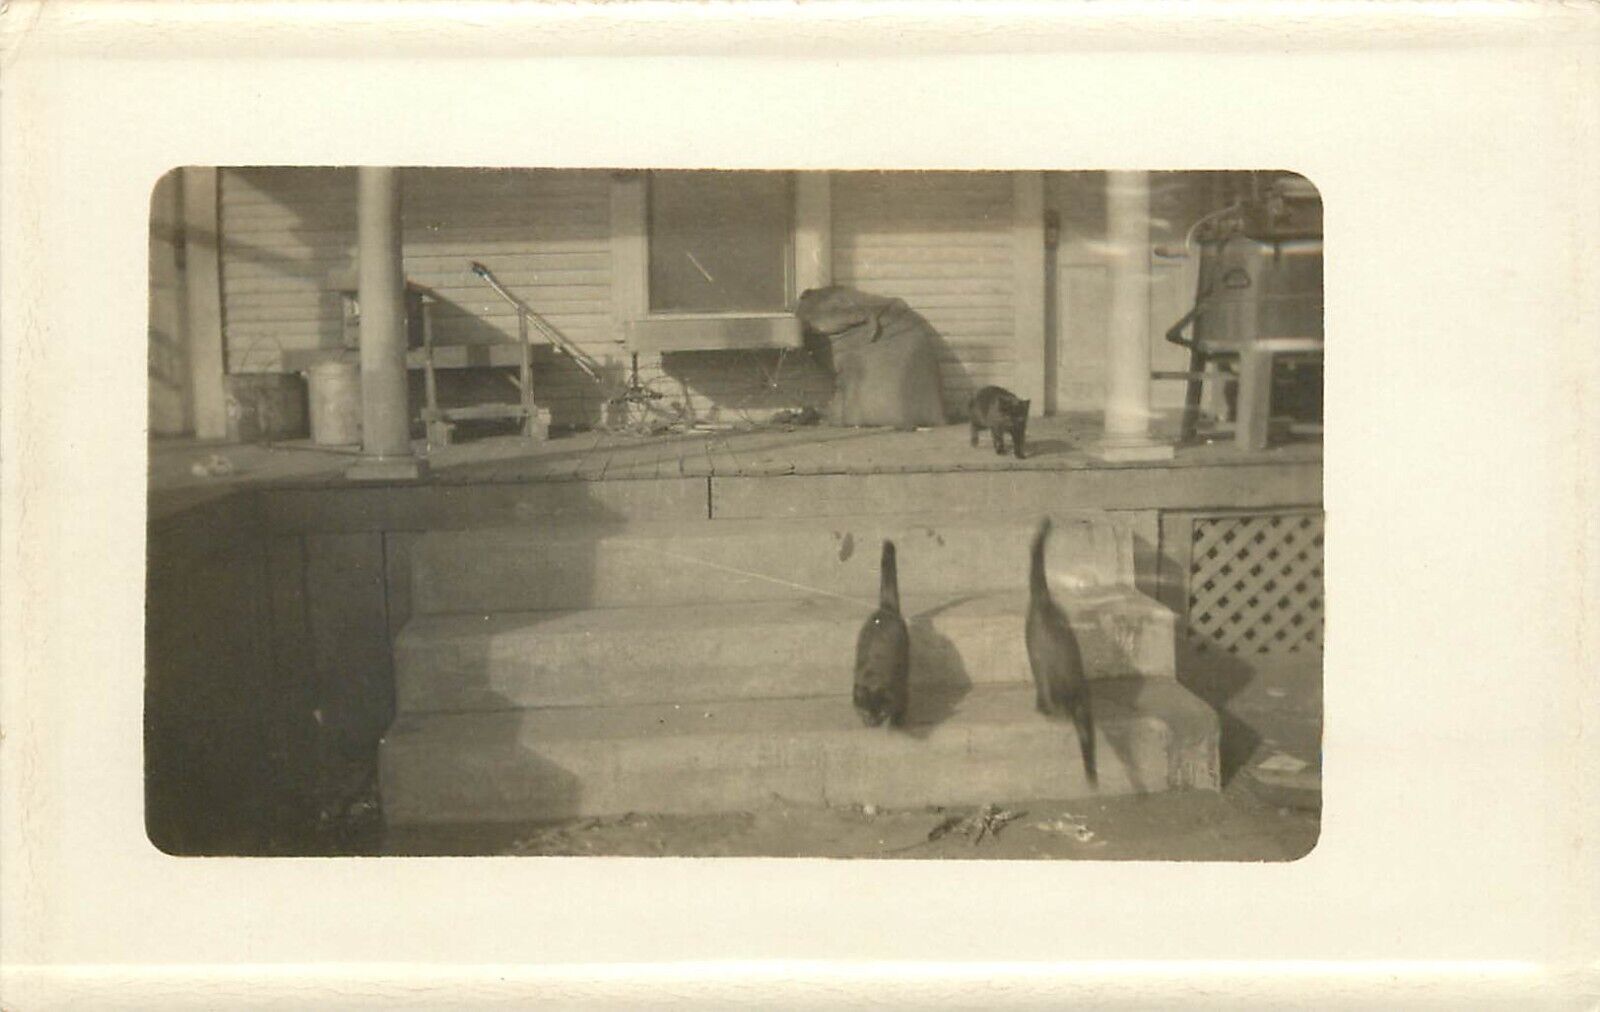 c1910 RPPC Postcard 3 Black Cats on Porch Steps of House, Unknown US Location